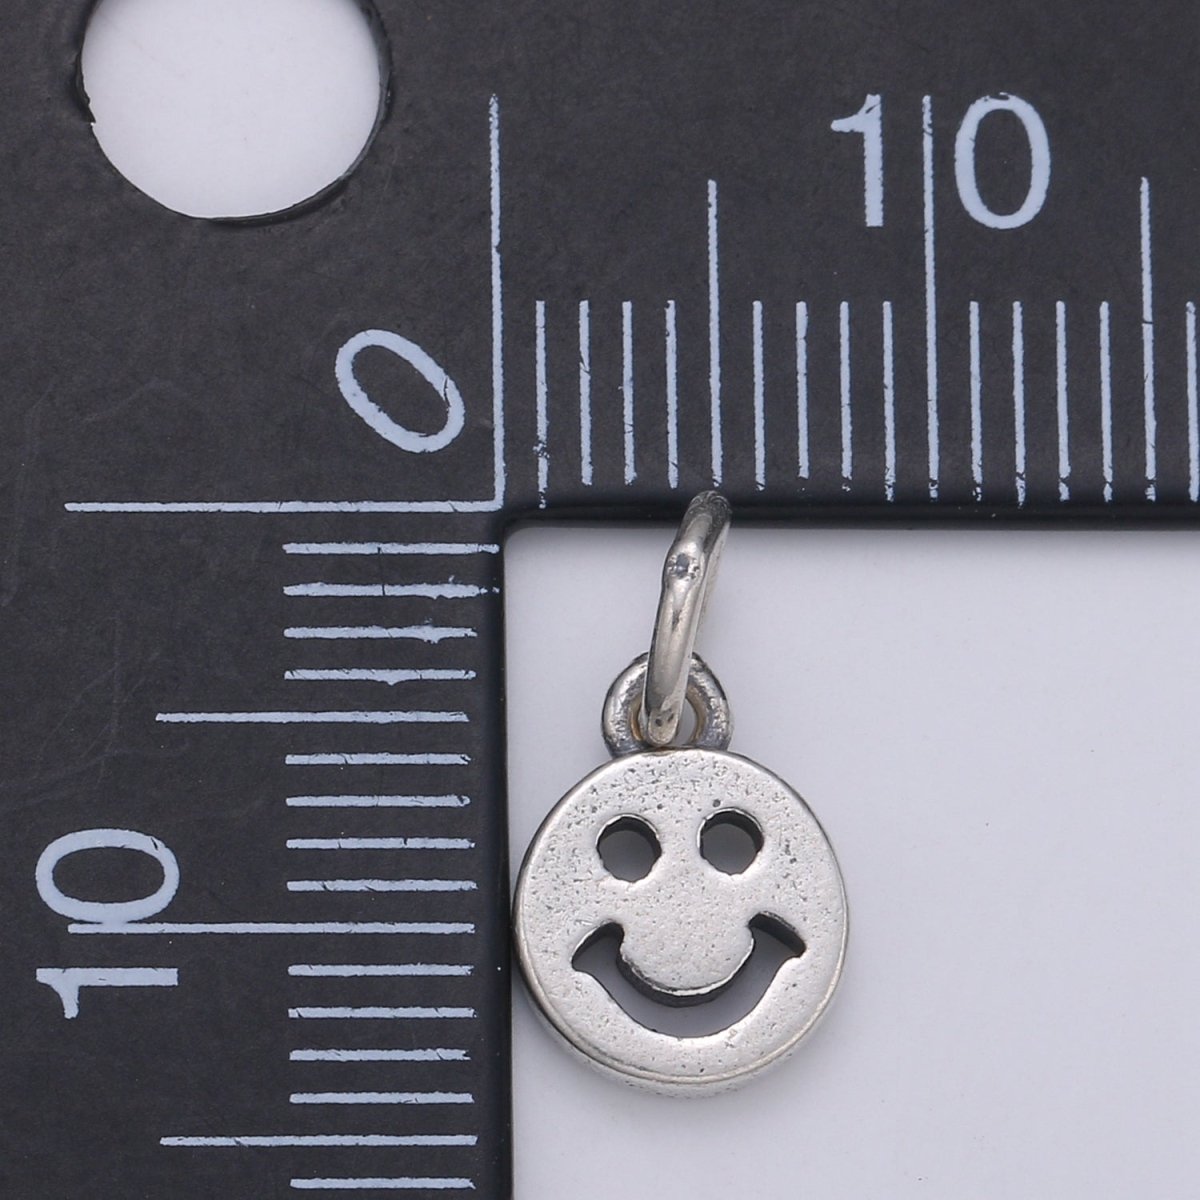 925 Sterling Silver Small Happy Face Charm, Message Charm Silver Happy Face Charm for Necklace Bracelet Earring, Happy Charm SL-148 - DLUXCA